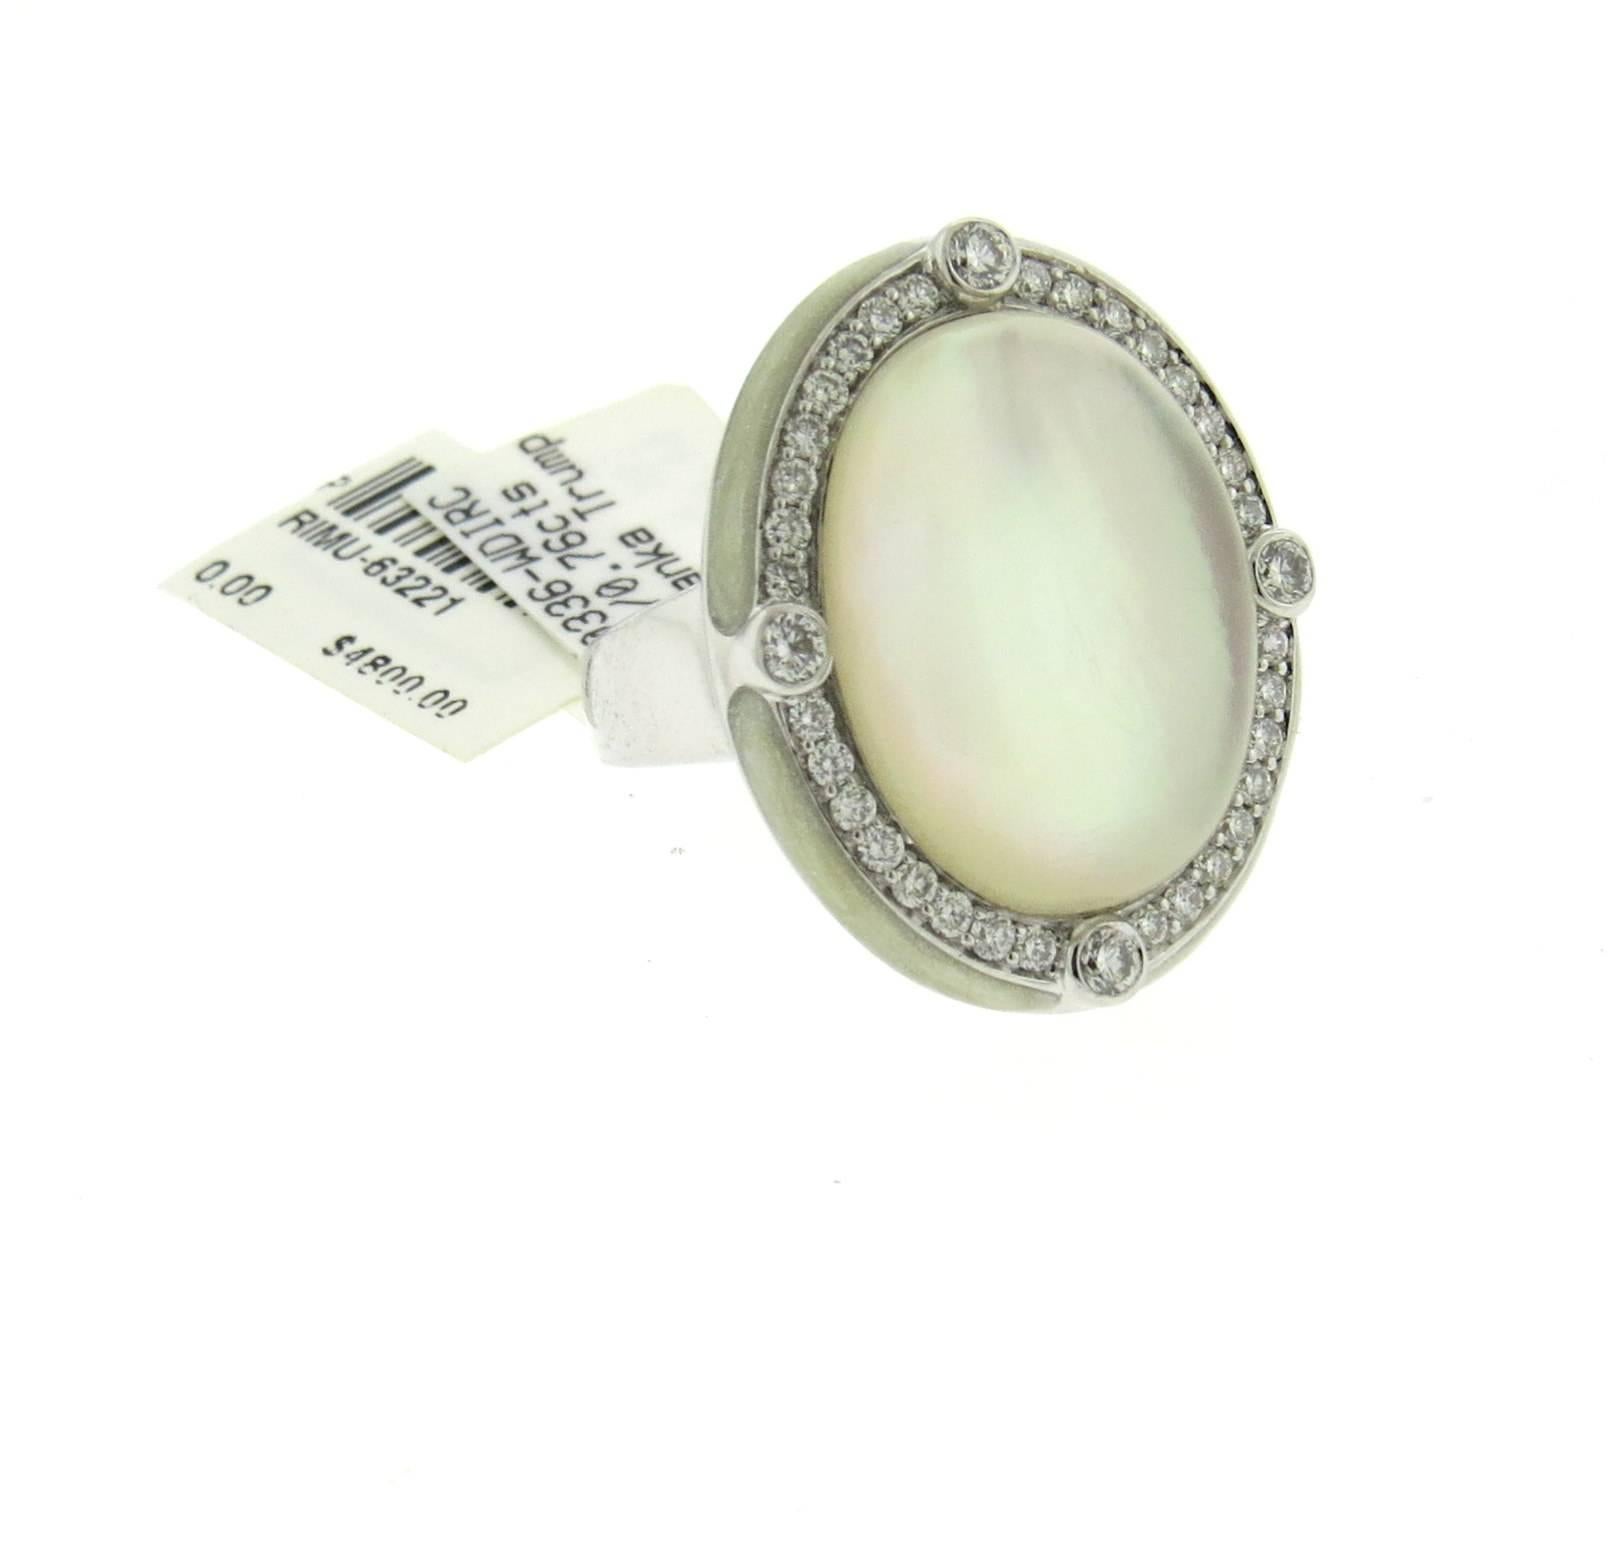 Large cocktail 18k white gold ring, crafted by Ivanka Trump, featuring crystal top, backed with mother of pearl, surrounded with approximately 0.76ctw in diamonds and enamel rim. Ring is a size 7 1/4, ring top measures 26mm x 21mm. Marked: Ivanka